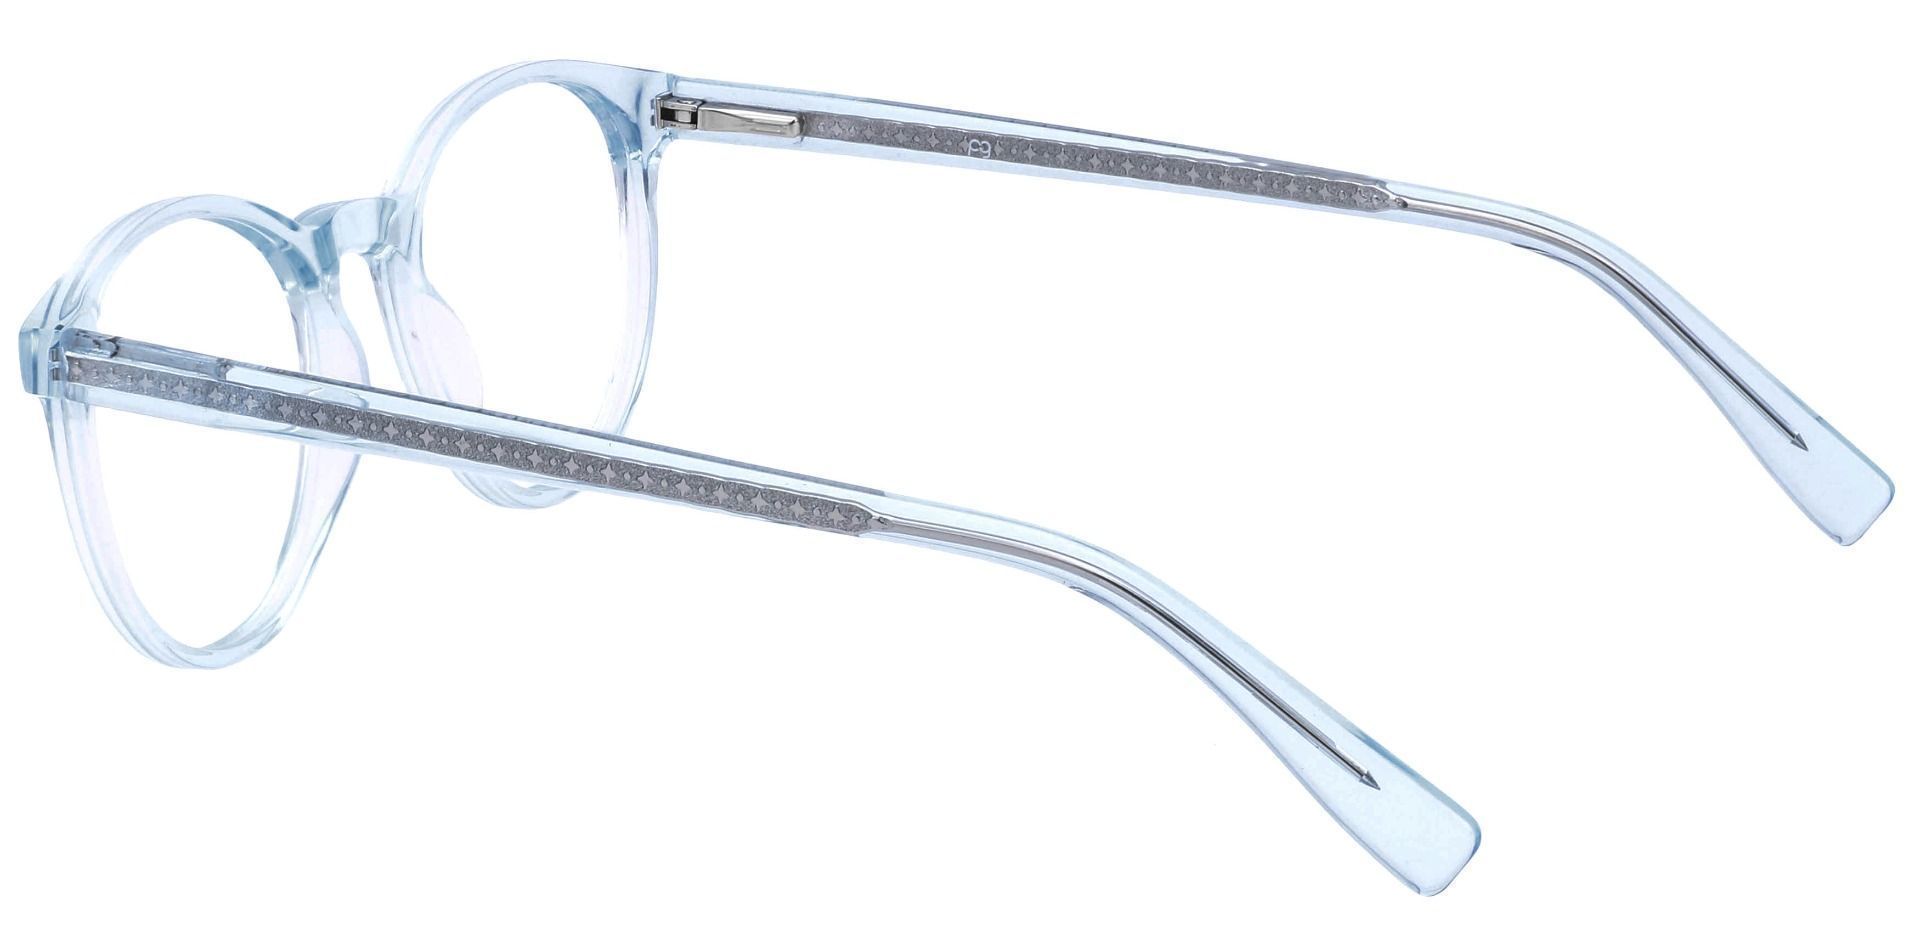 Stellar Oval Eyeglasses Frame - The Frame Is Clear With Light Blue